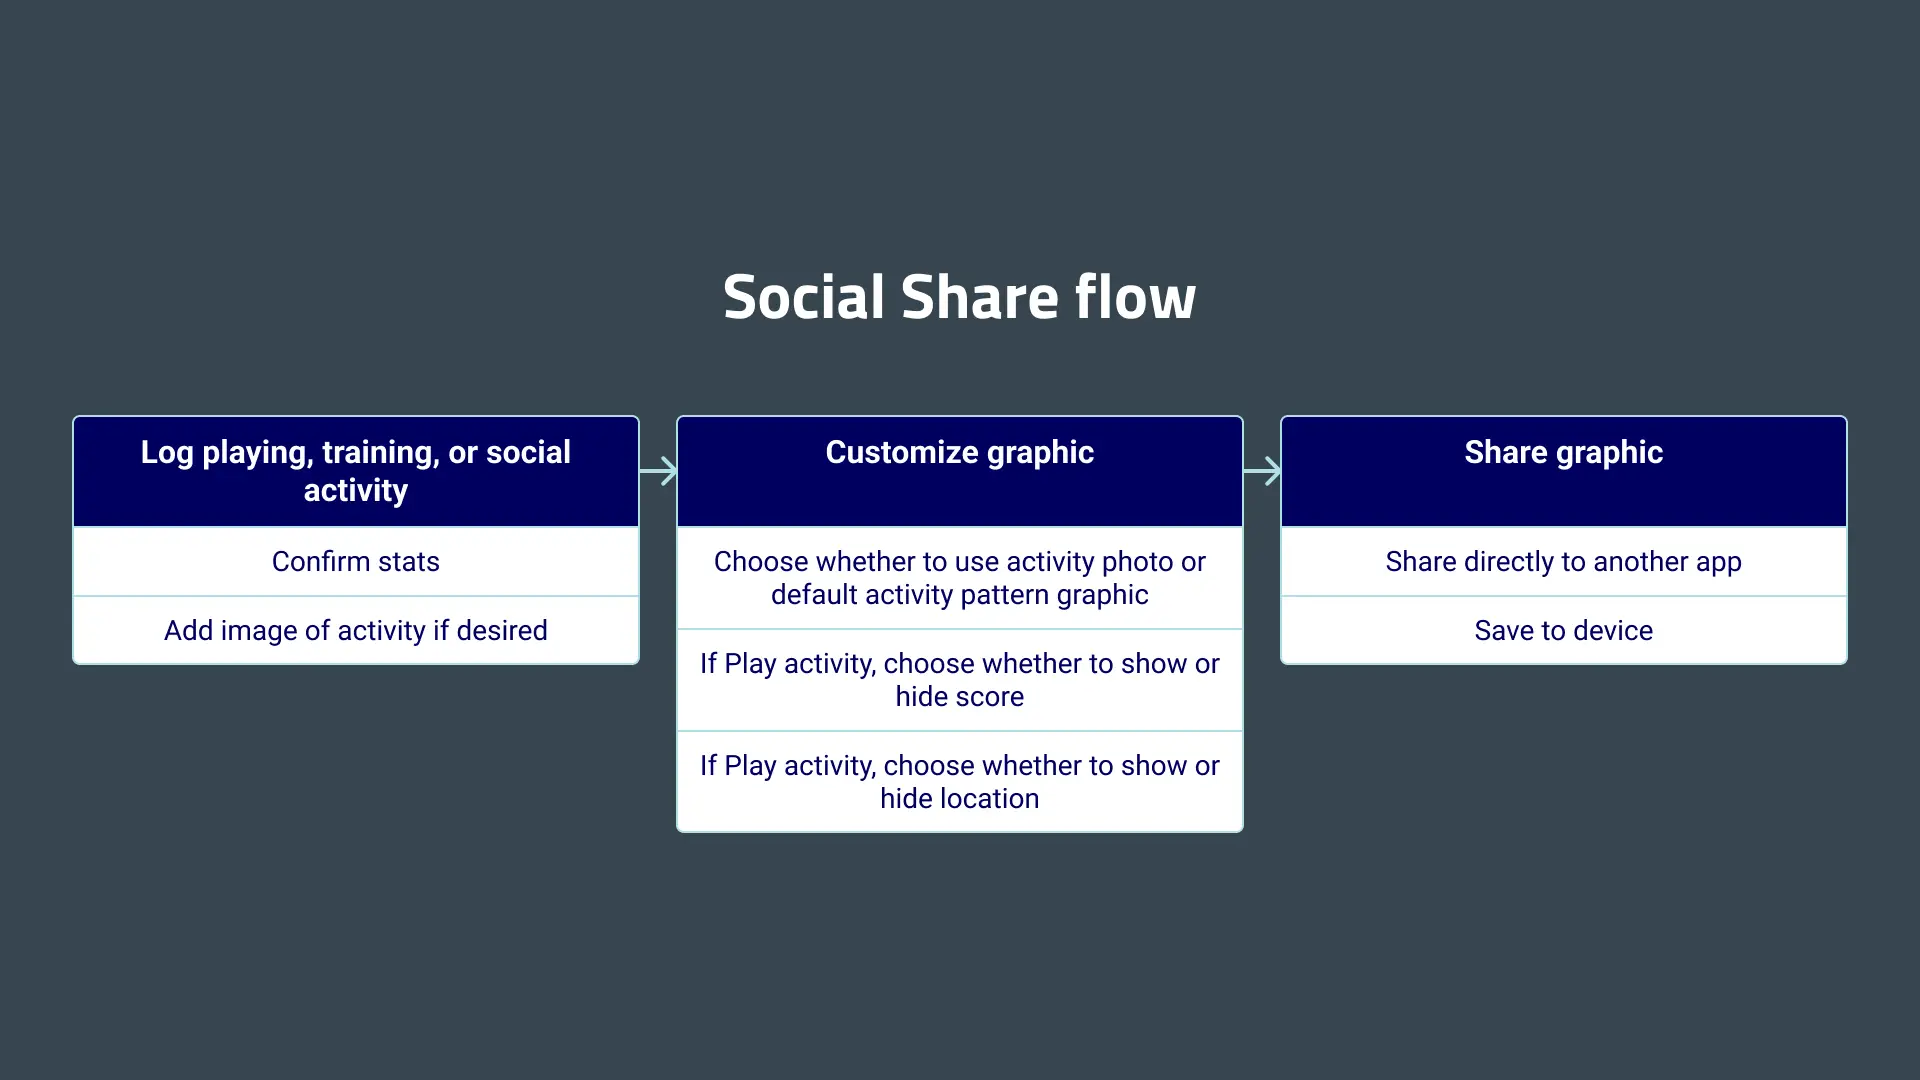 Flow for creating a graphic using the Social Share feature.